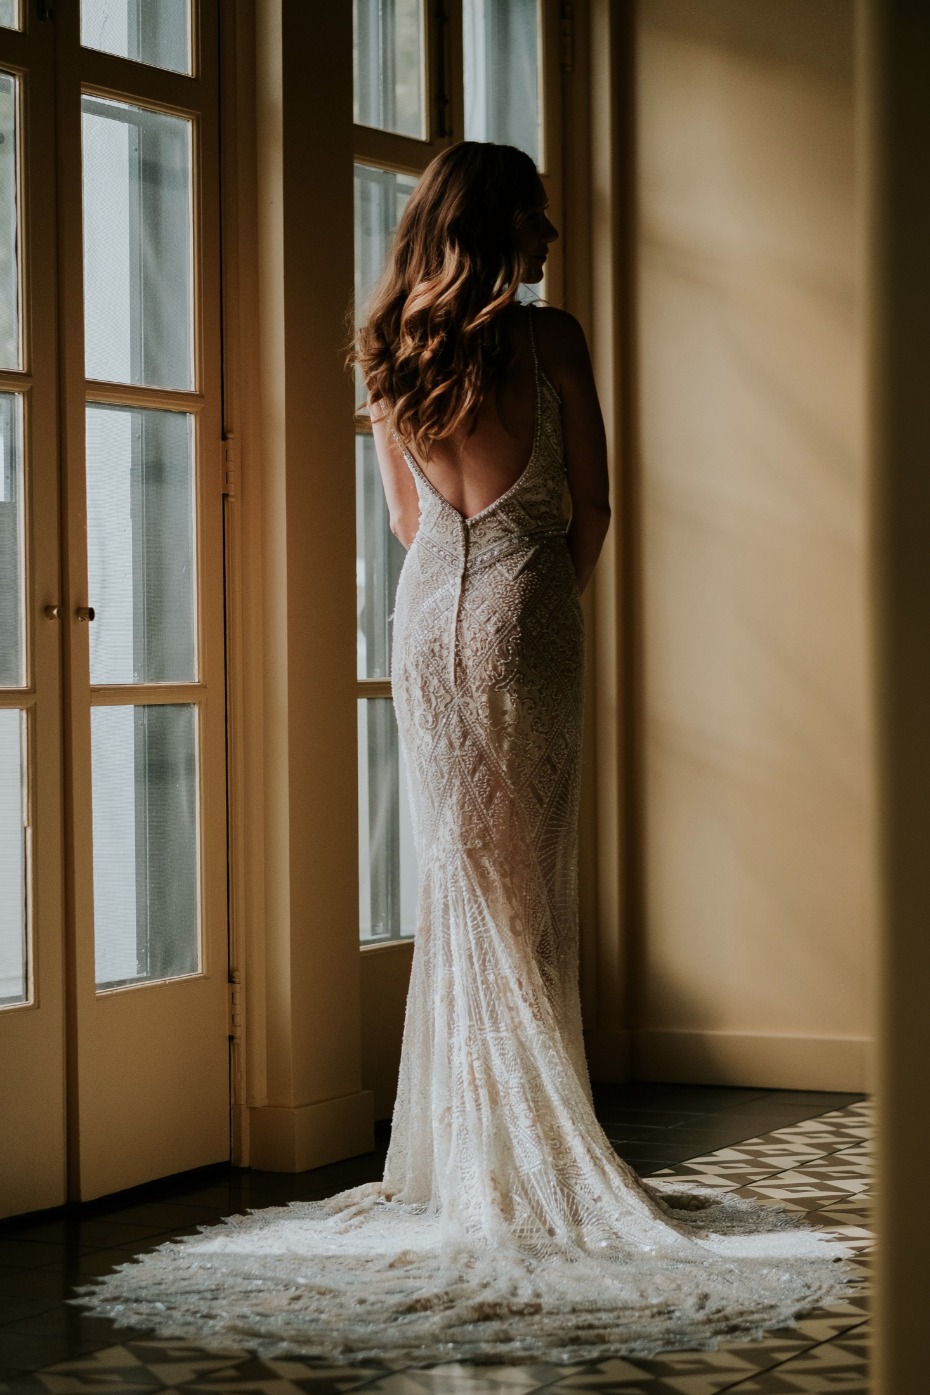 Gorgeous gown